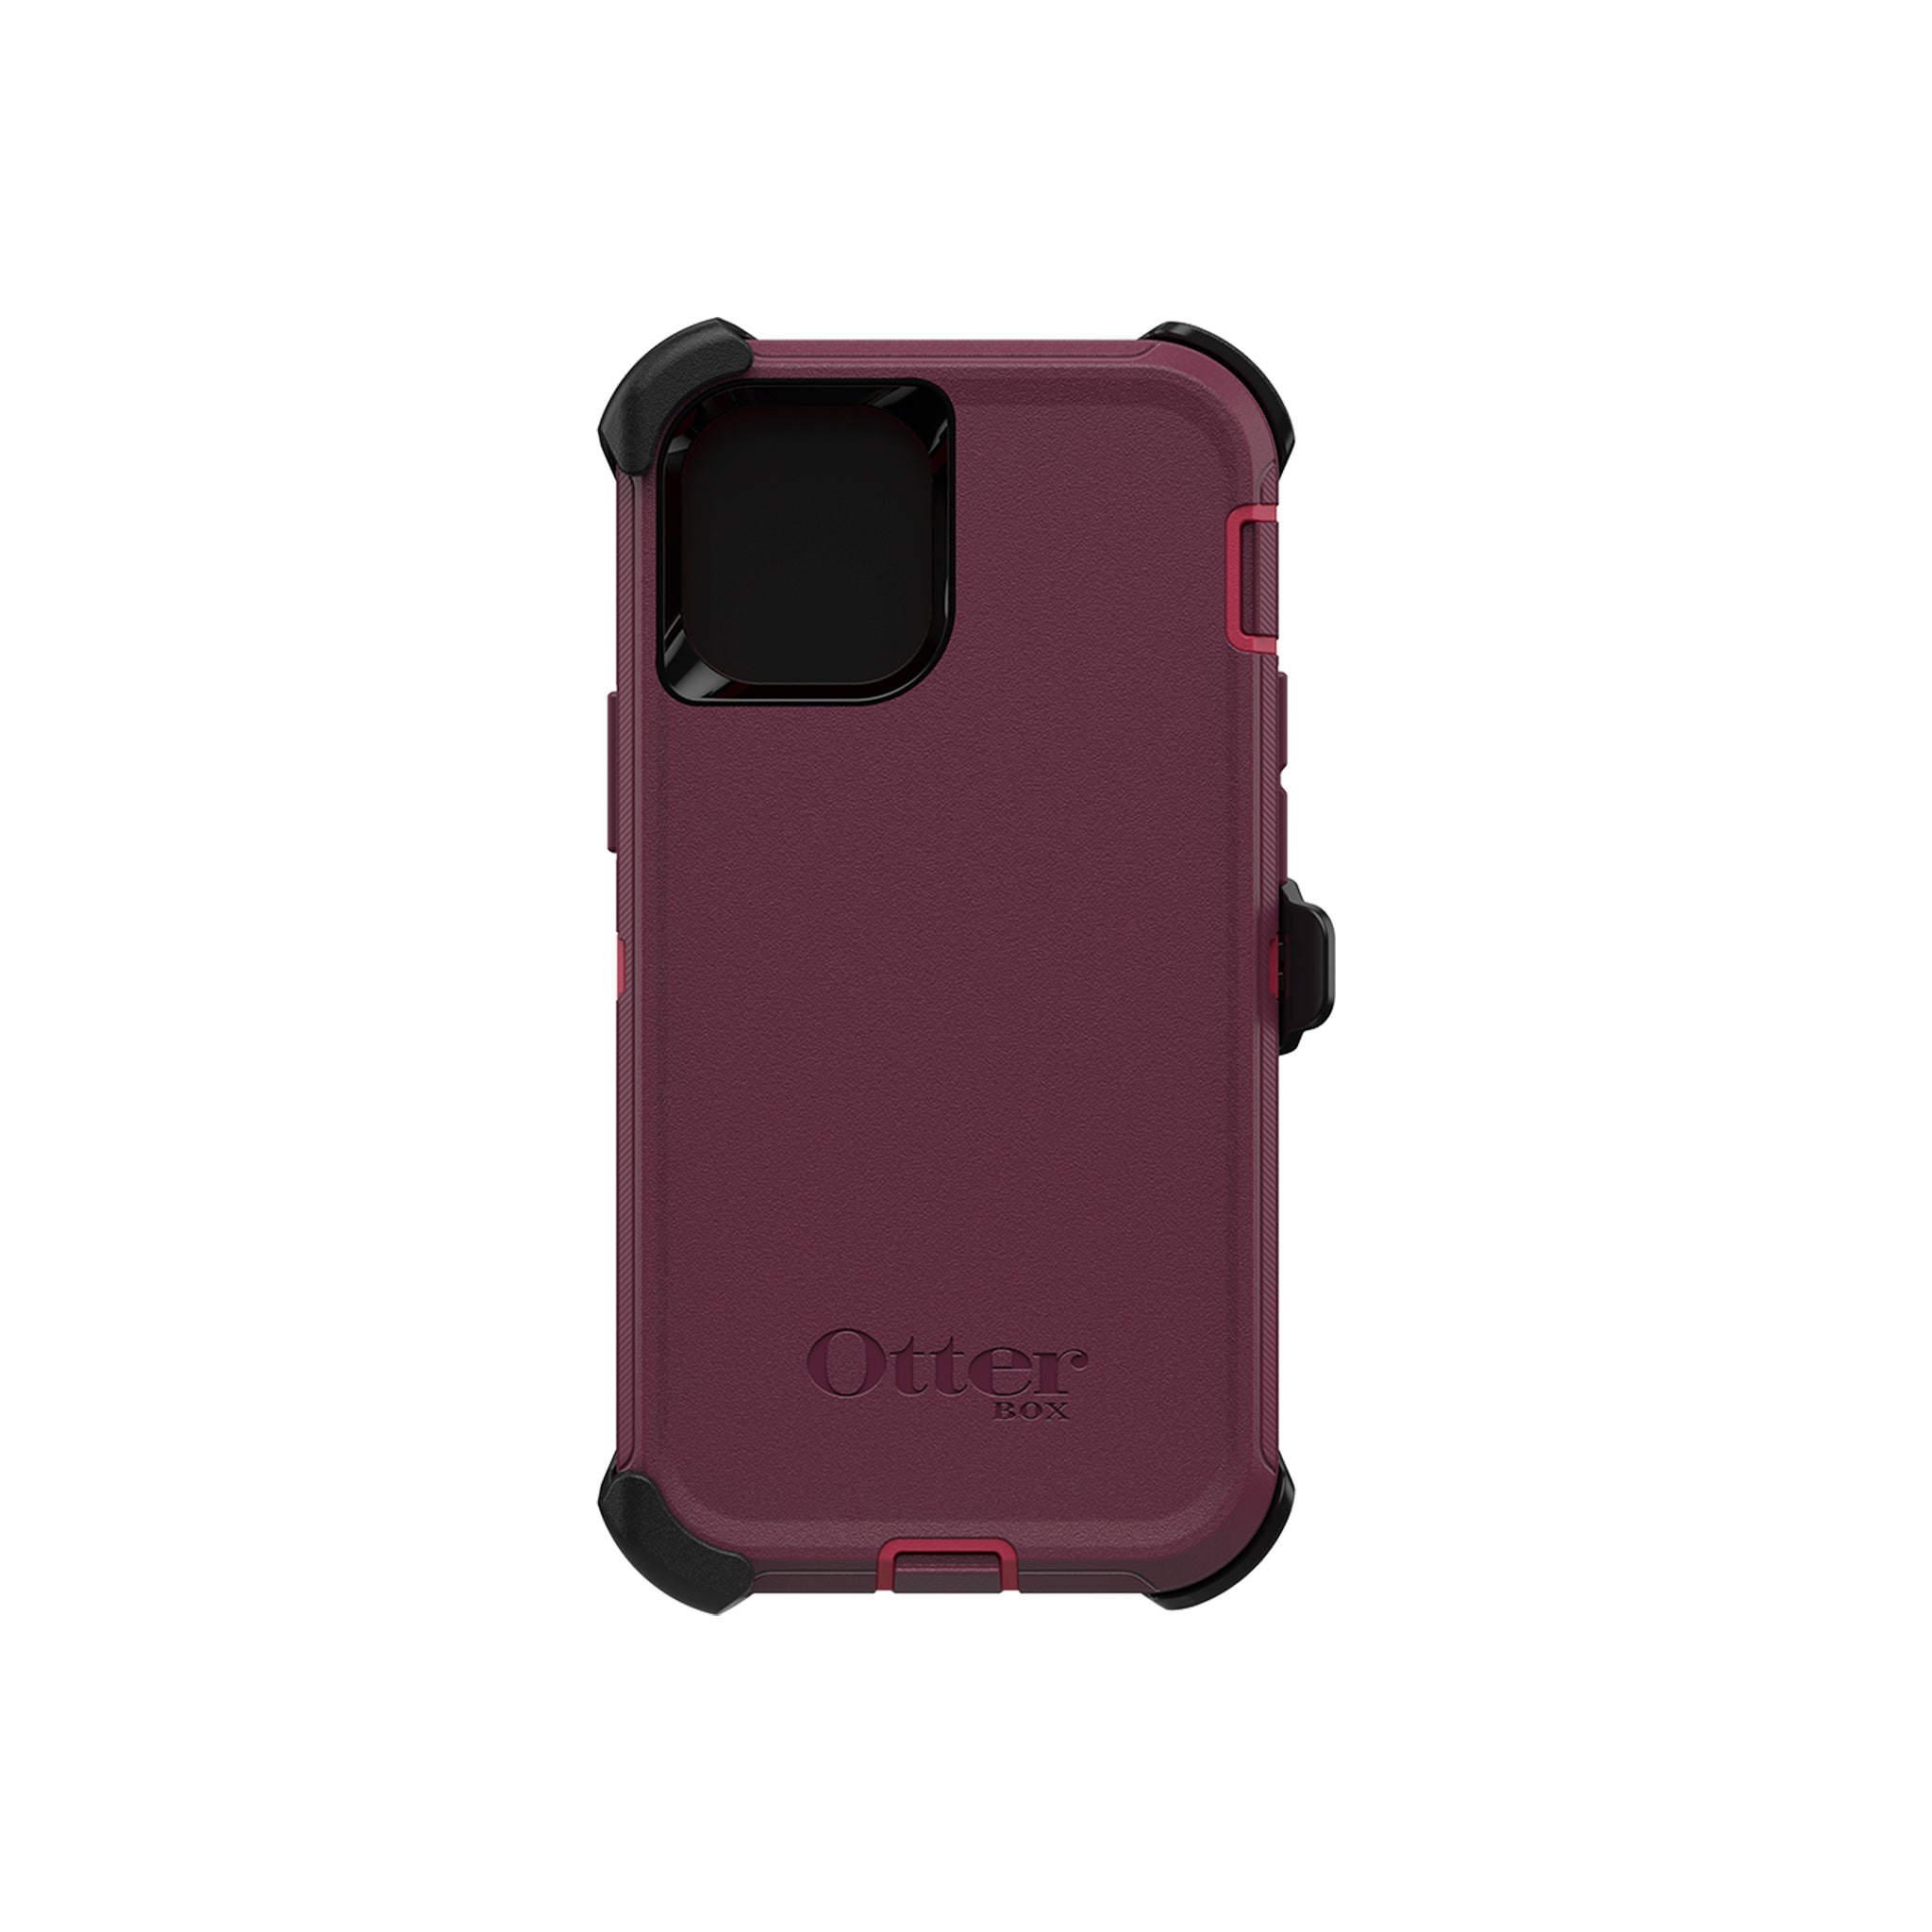 OtterBox - Defender for iPhone 12 mini - Berry Potion